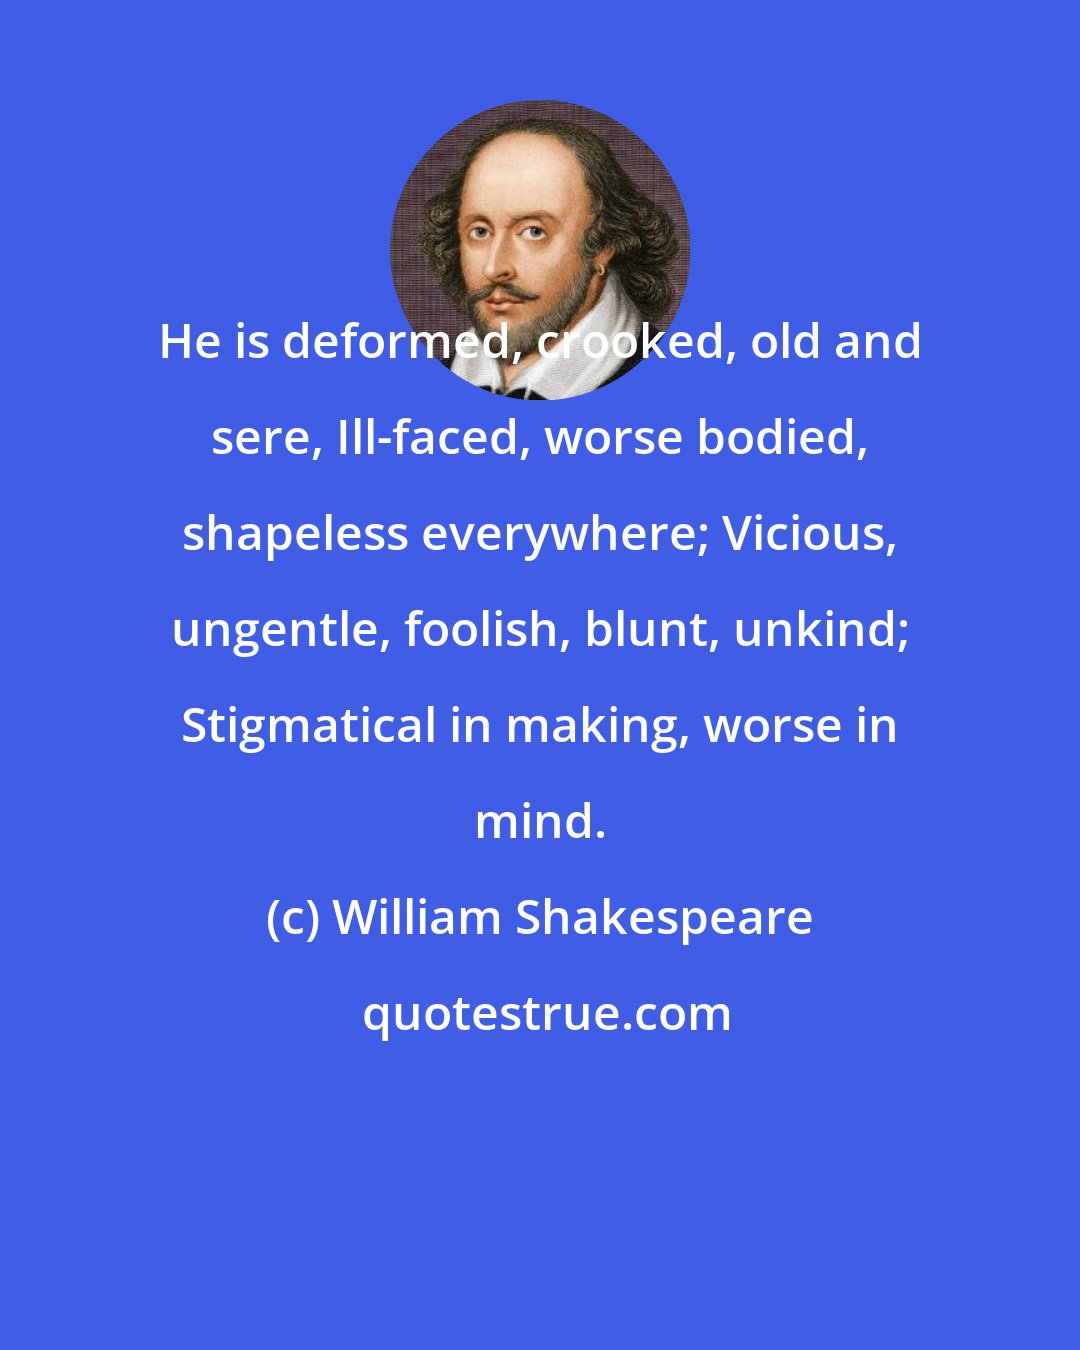 William Shakespeare: He is deformed, crooked, old and sere, Ill-faced, worse bodied, shapeless everywhere; Vicious, ungentle, foolish, blunt, unkind; Stigmatical in making, worse in mind.